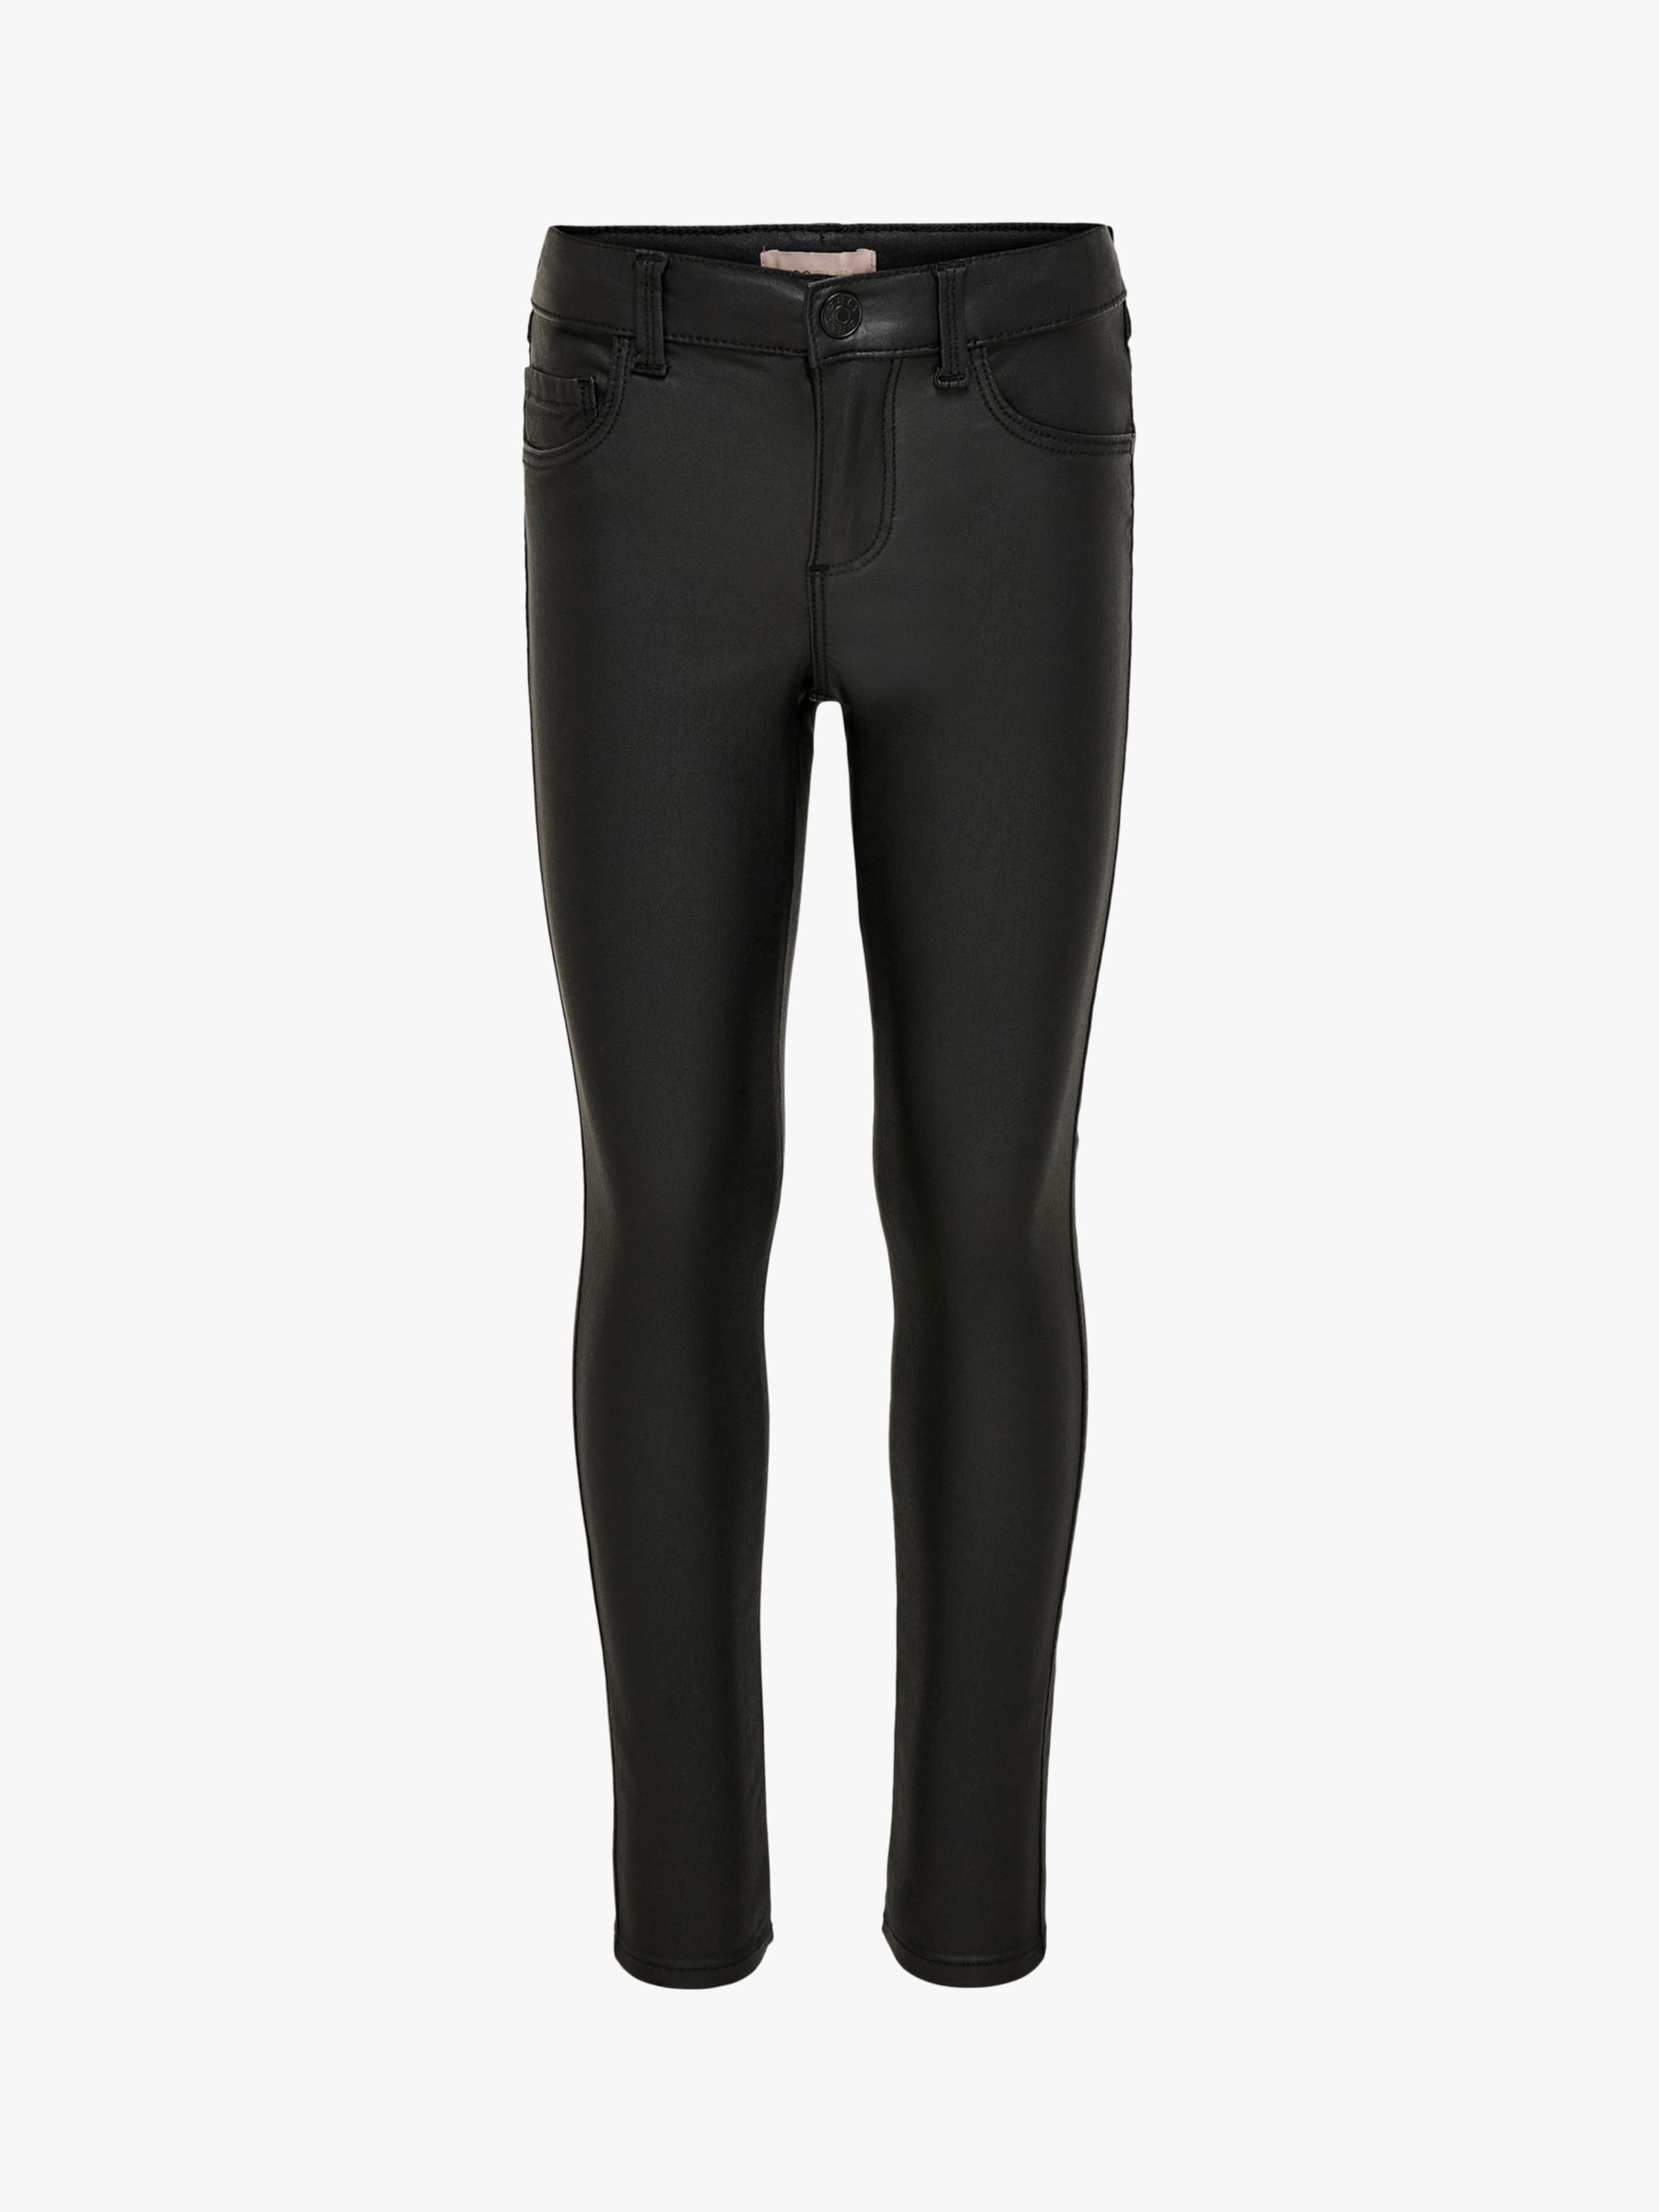 Buy ONLY Kids' Coated Rock Skinny Trousers, Black Online at johnlewis.com